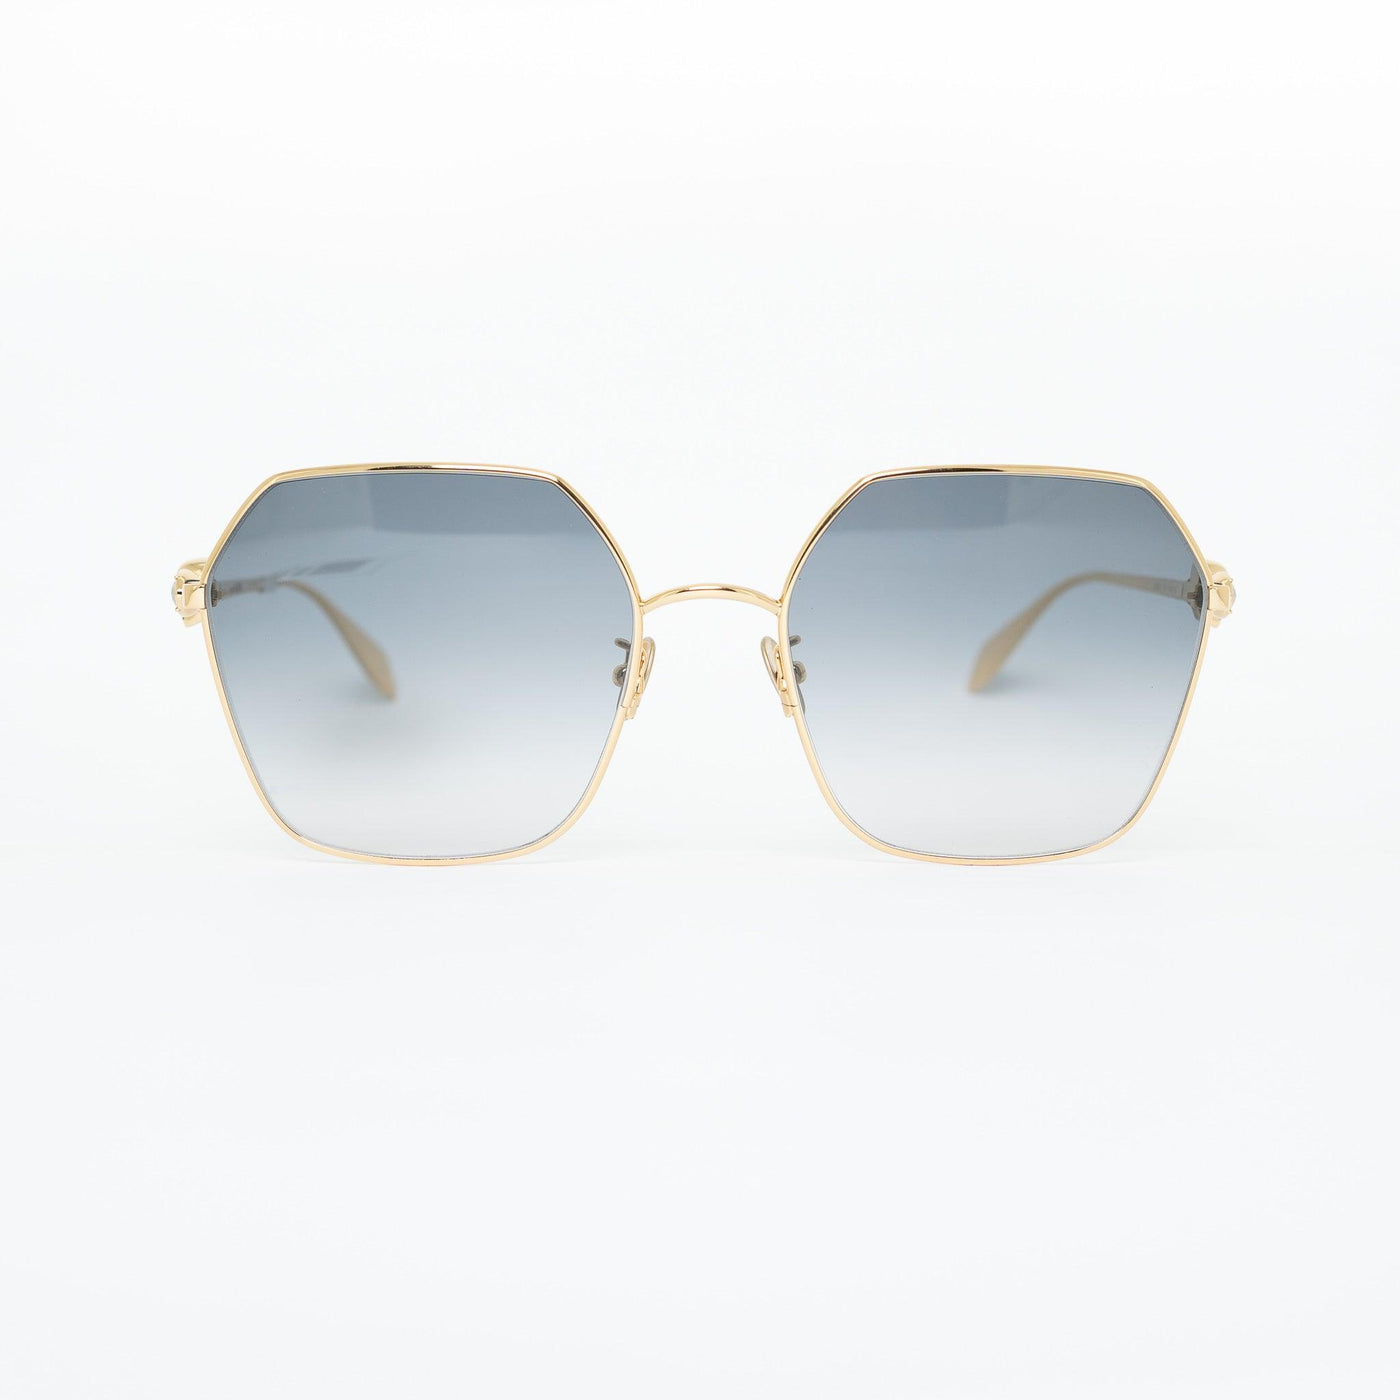 Alexander McQueen AM 0325S/001| Sunglasses - Vision Express Optical Philippines